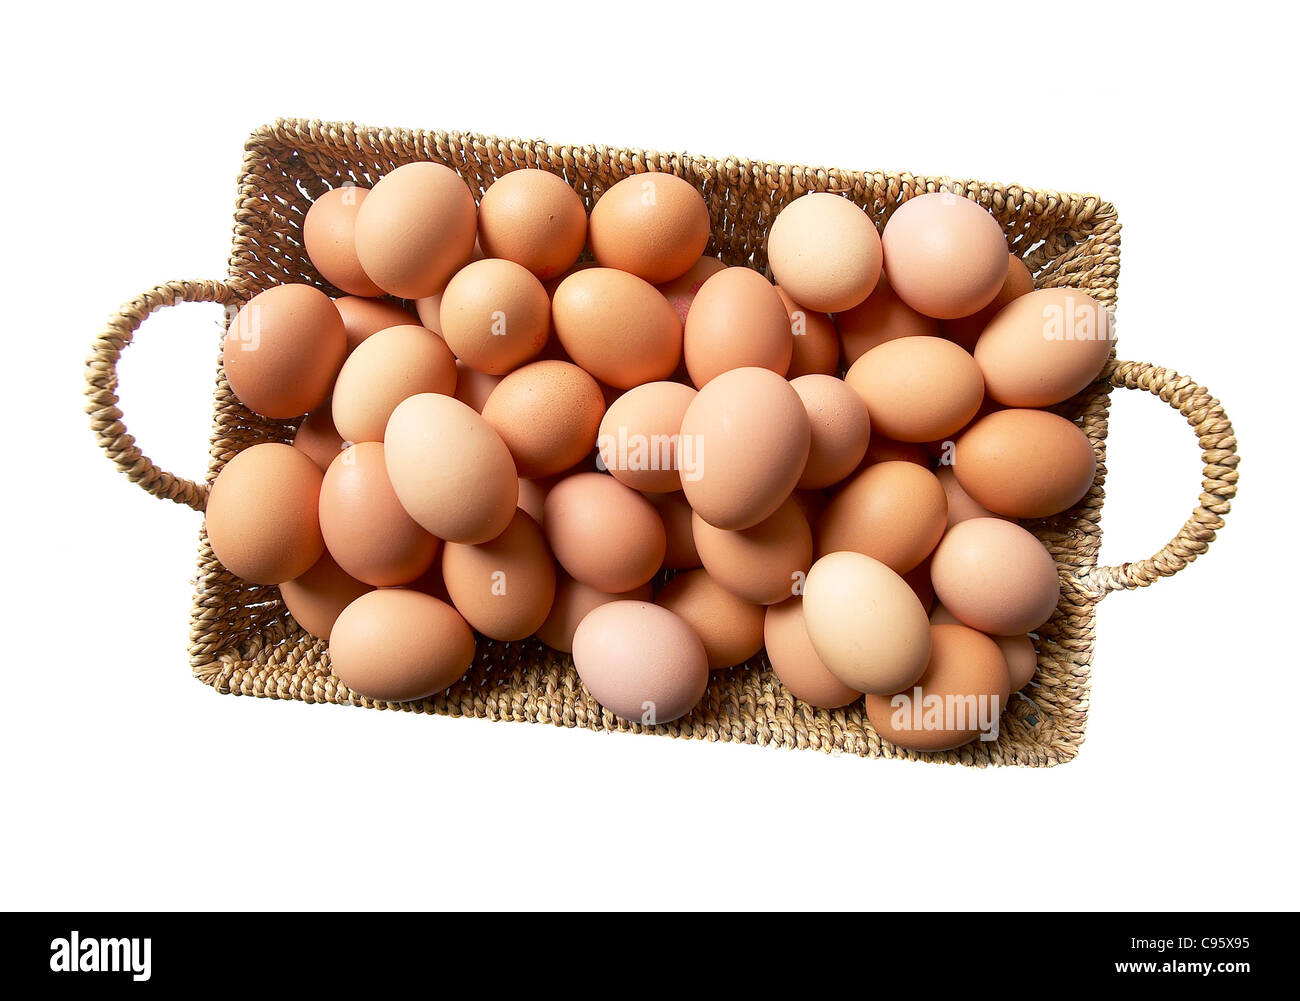 lots of eggs in one basket Stock Photo